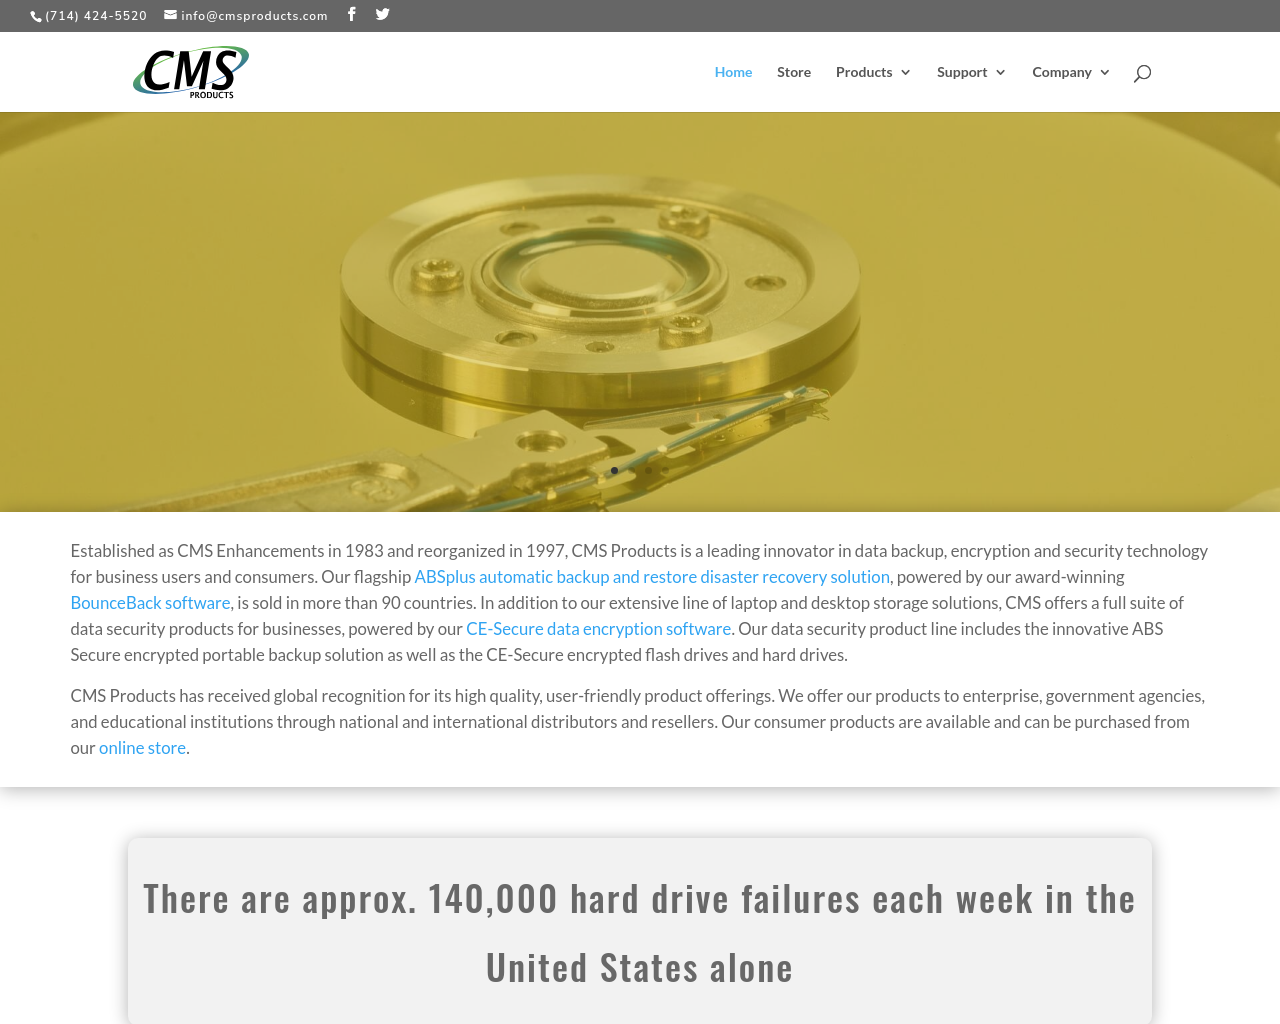 cmsproducts.com